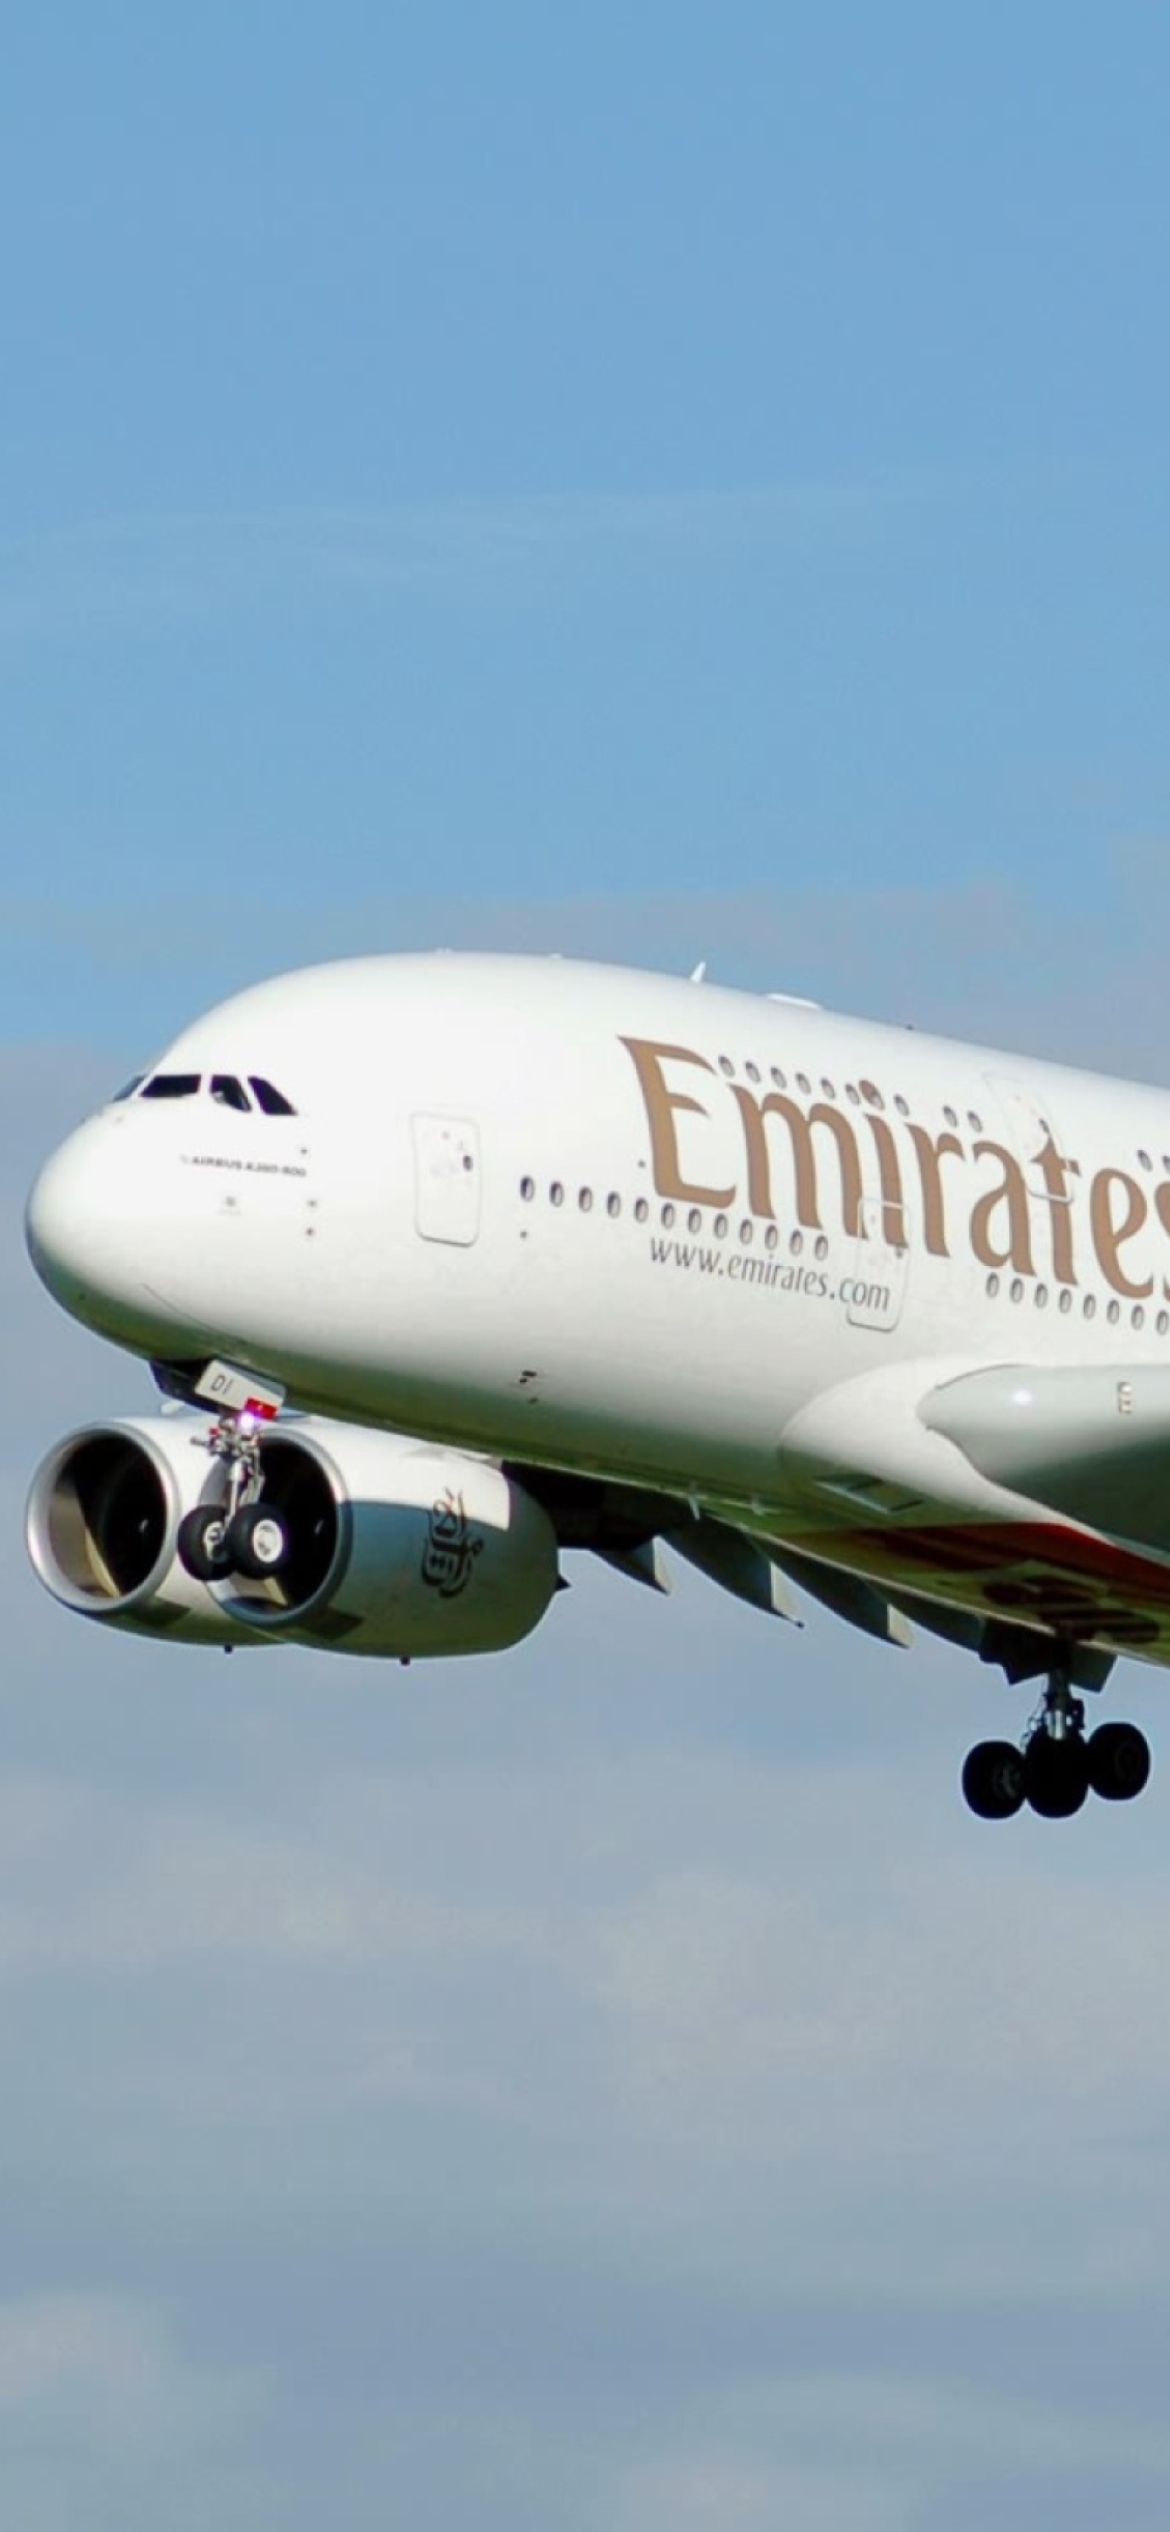 Emirates Airlines wallpaper 1170x2532